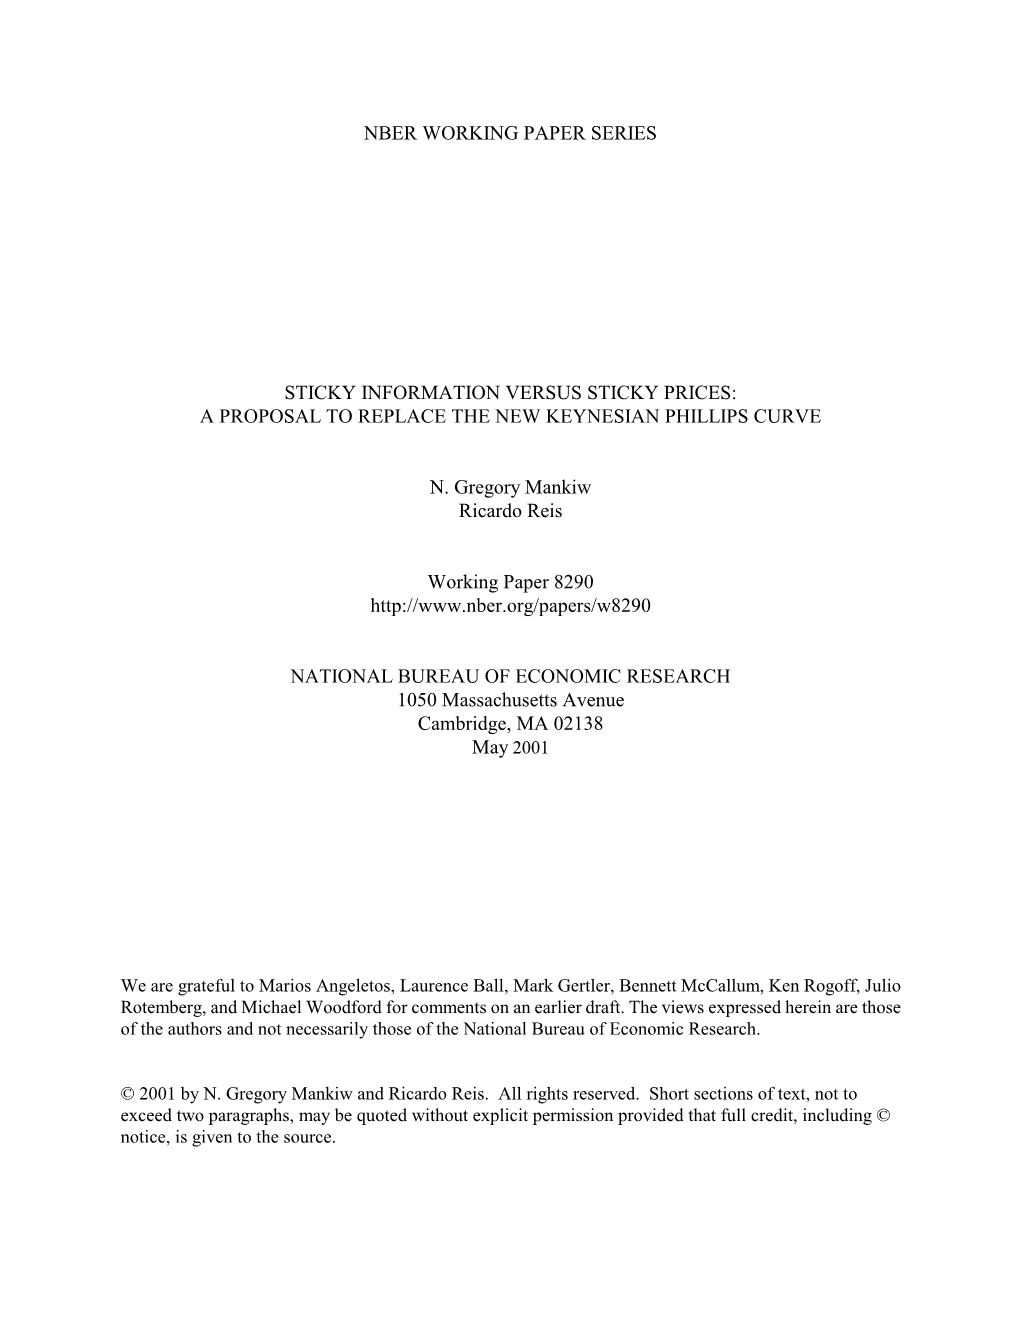 Nber Working Paper Series Sticky Information Versus Sticky Prices: a Proposal to Replace the New Keynesian Phillips Curve N